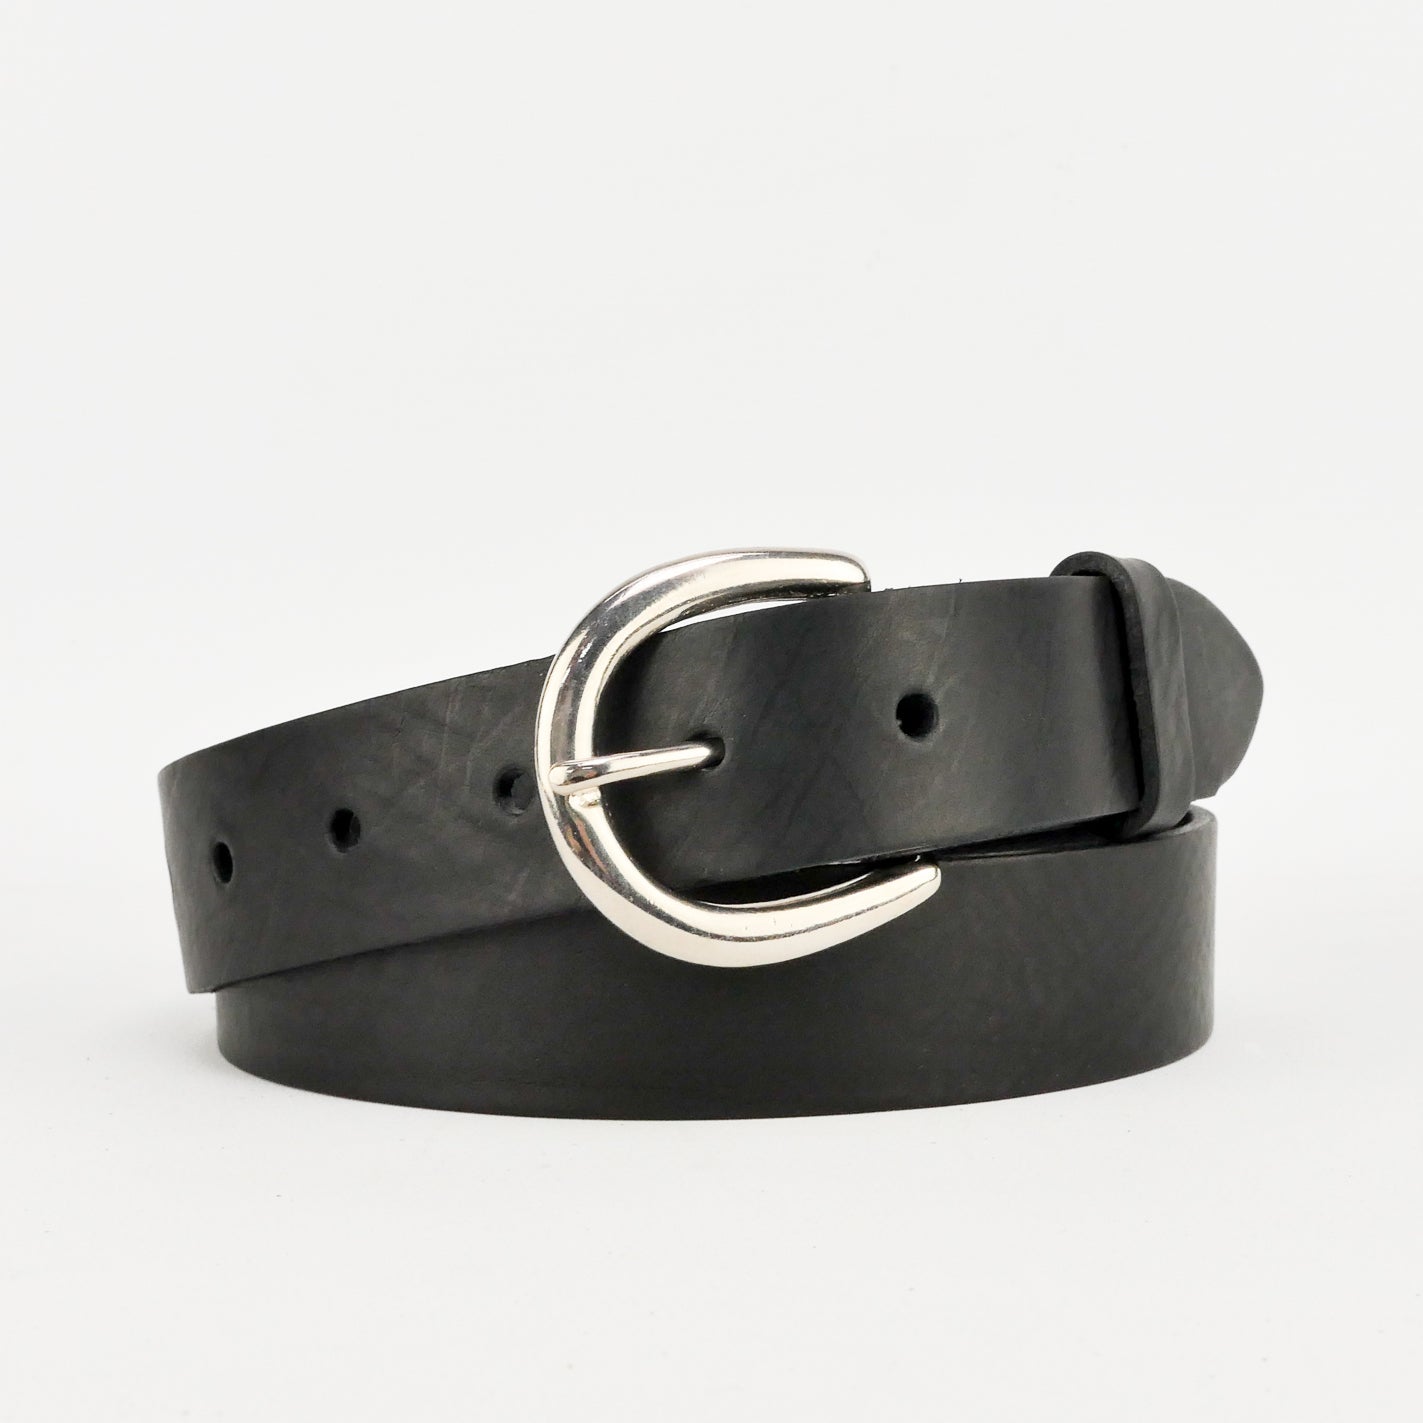 1 1/4" Classic Black Leather Belt, super versatile for jeans or trousers.